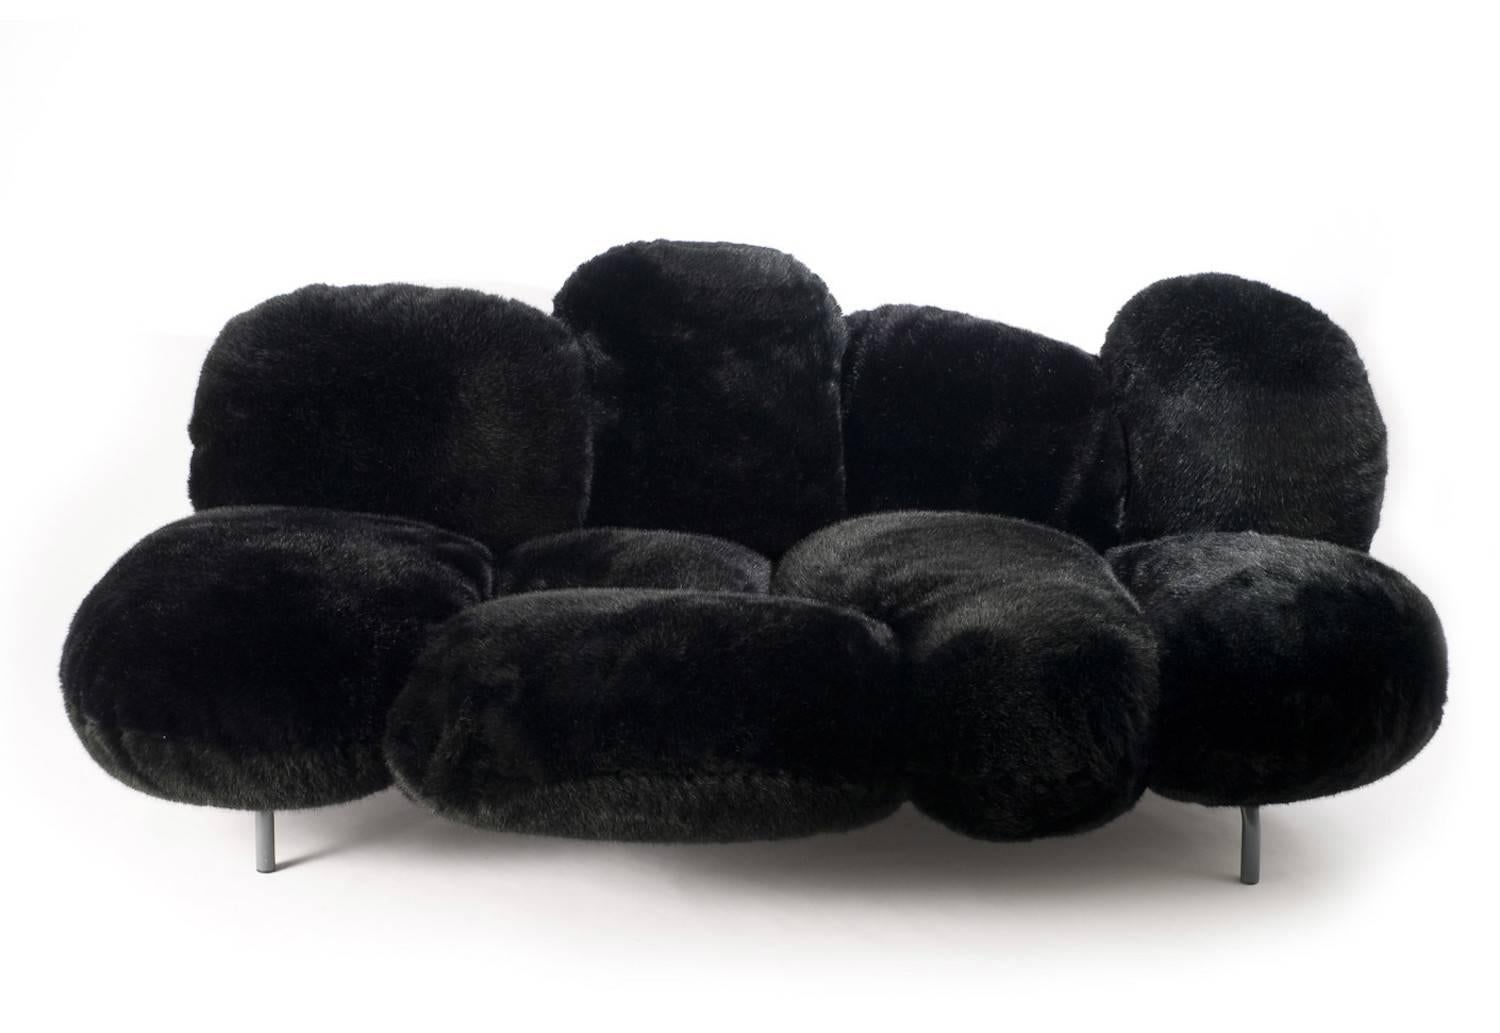 Cipria is a deeply iconic settee characterized by nine pillows reminiscent of powder puffs attached to an invisible structure of tubular metal. A sofa that provides multiple possibilities for seating both formal and informal.

Padding is in